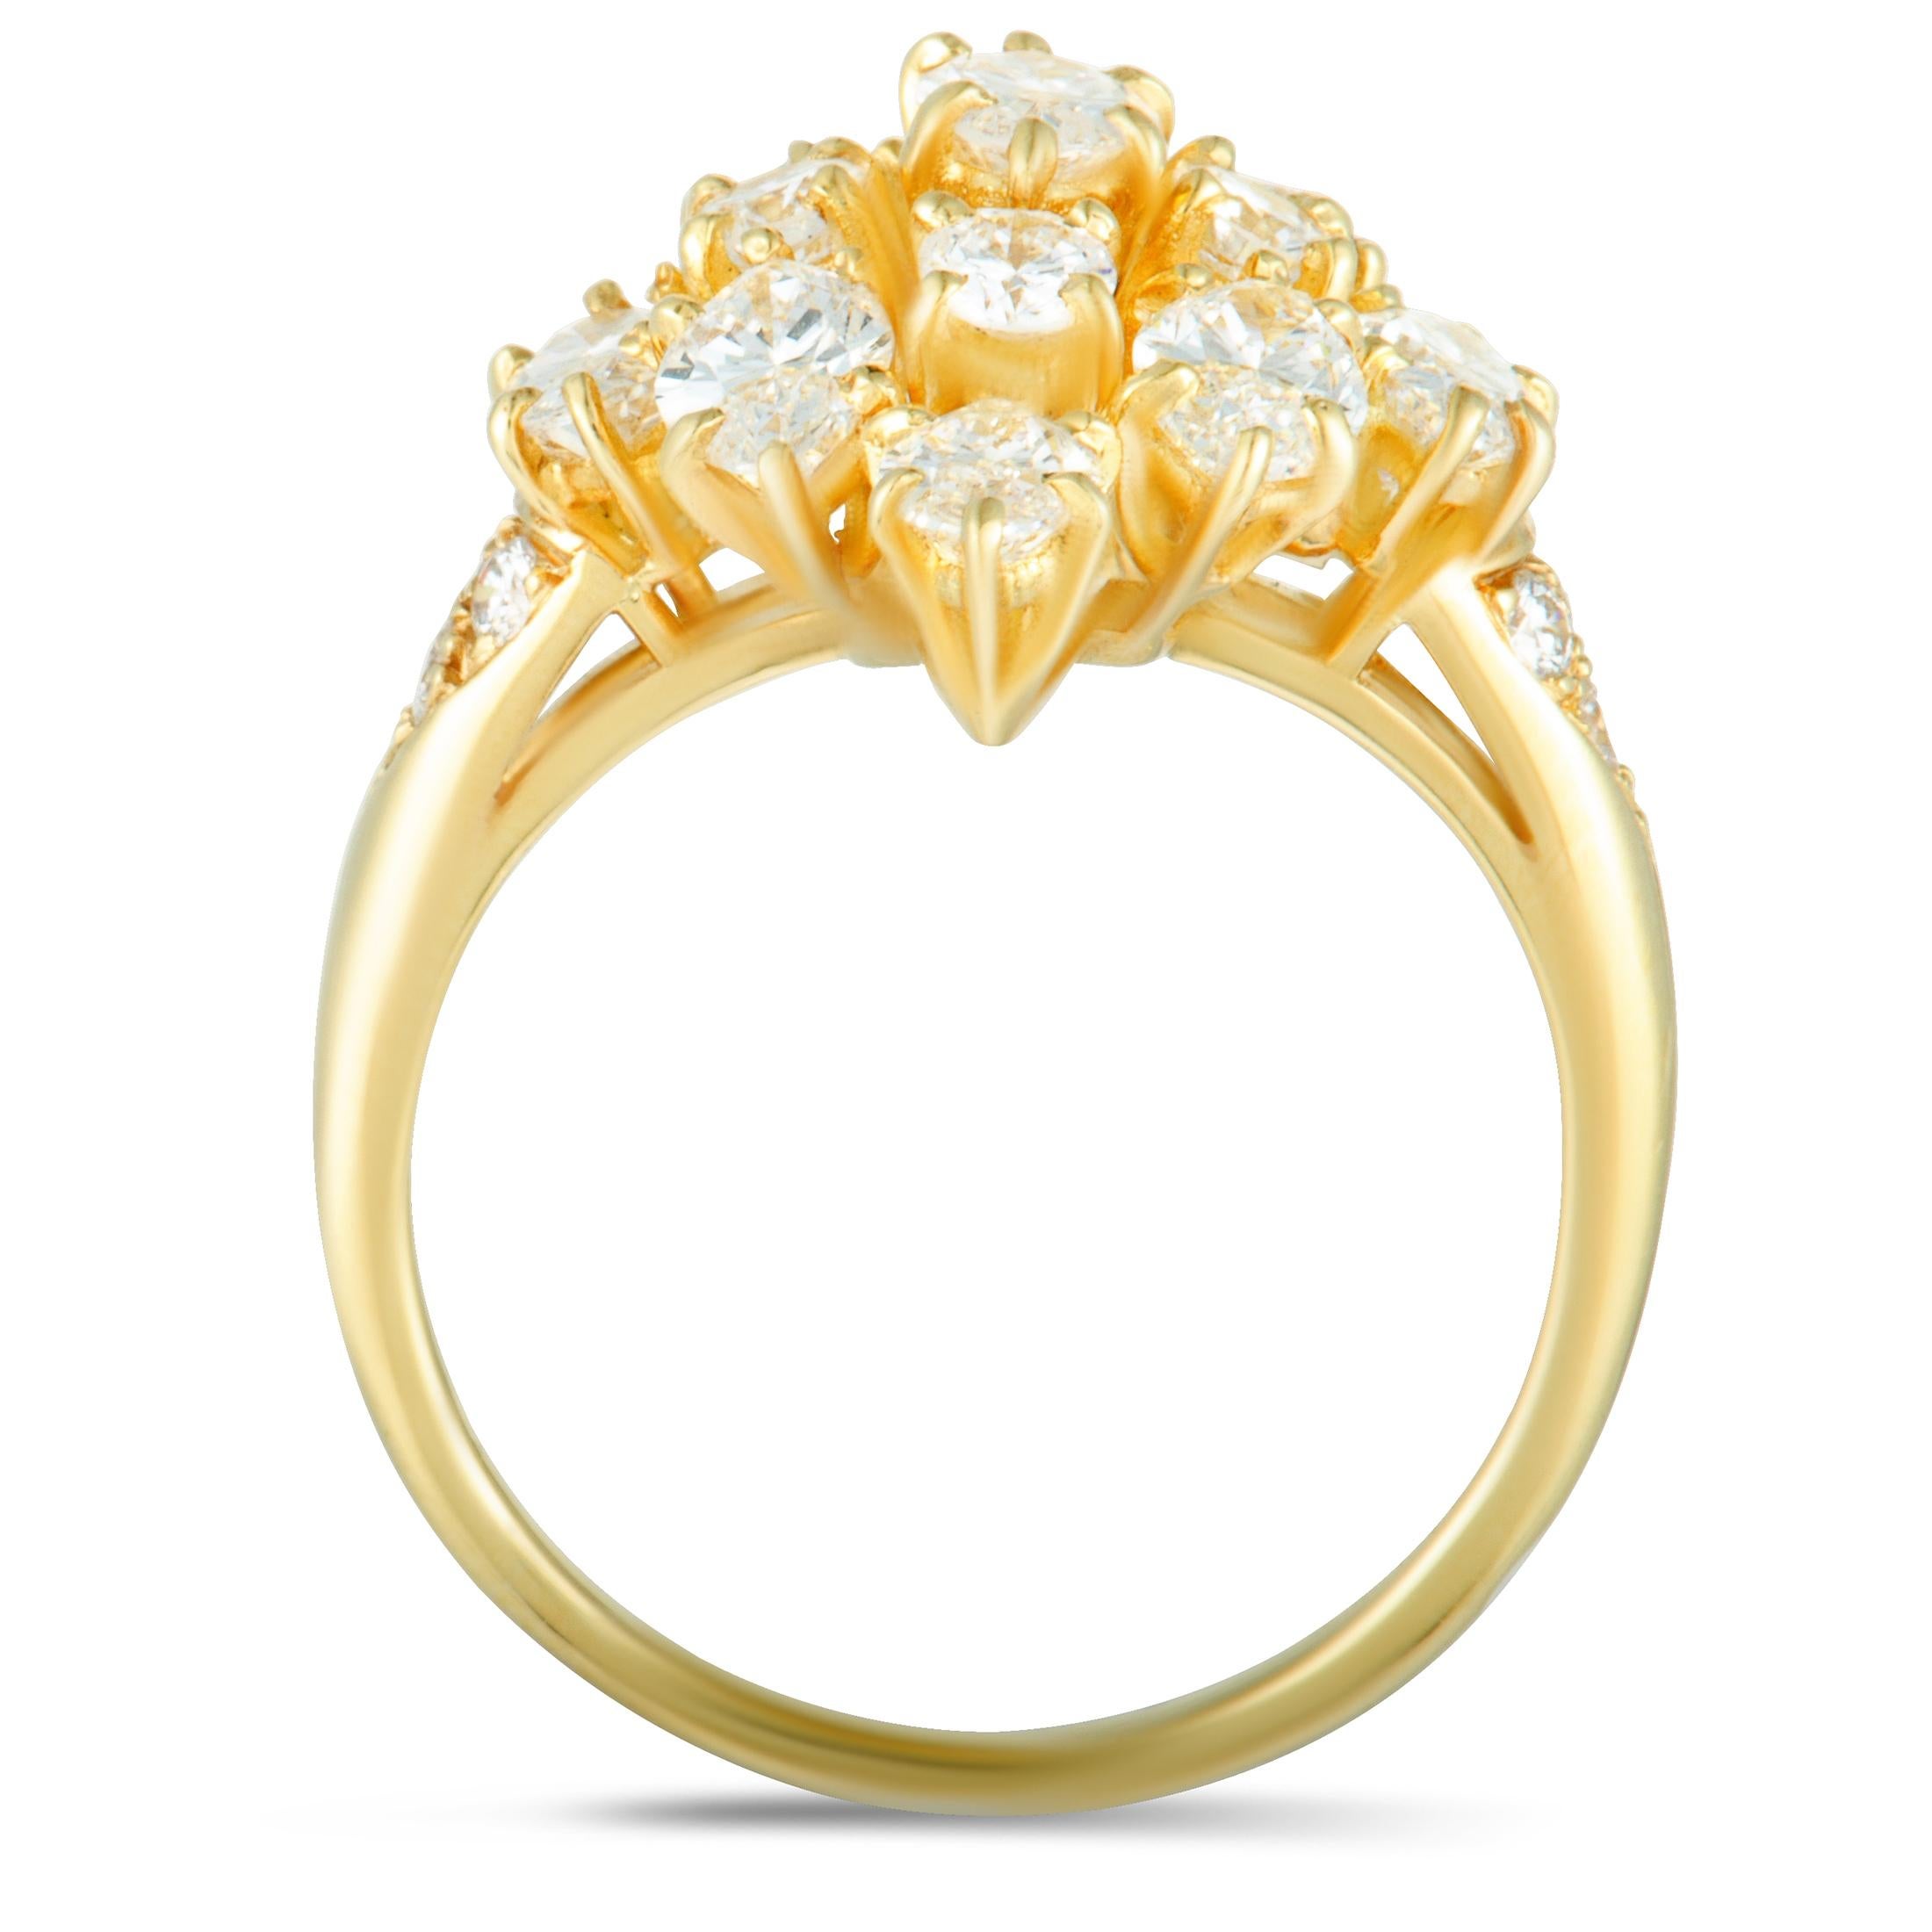 A beautifully opulent appearance is featured in this glamorous ring by Van Cleef & Arpels. The stunning ring is gorgeously crafted from the prestigious shimmer of 18K yellow gold and adorned with 3.06ct of lustrous F-color, VS1 clarity